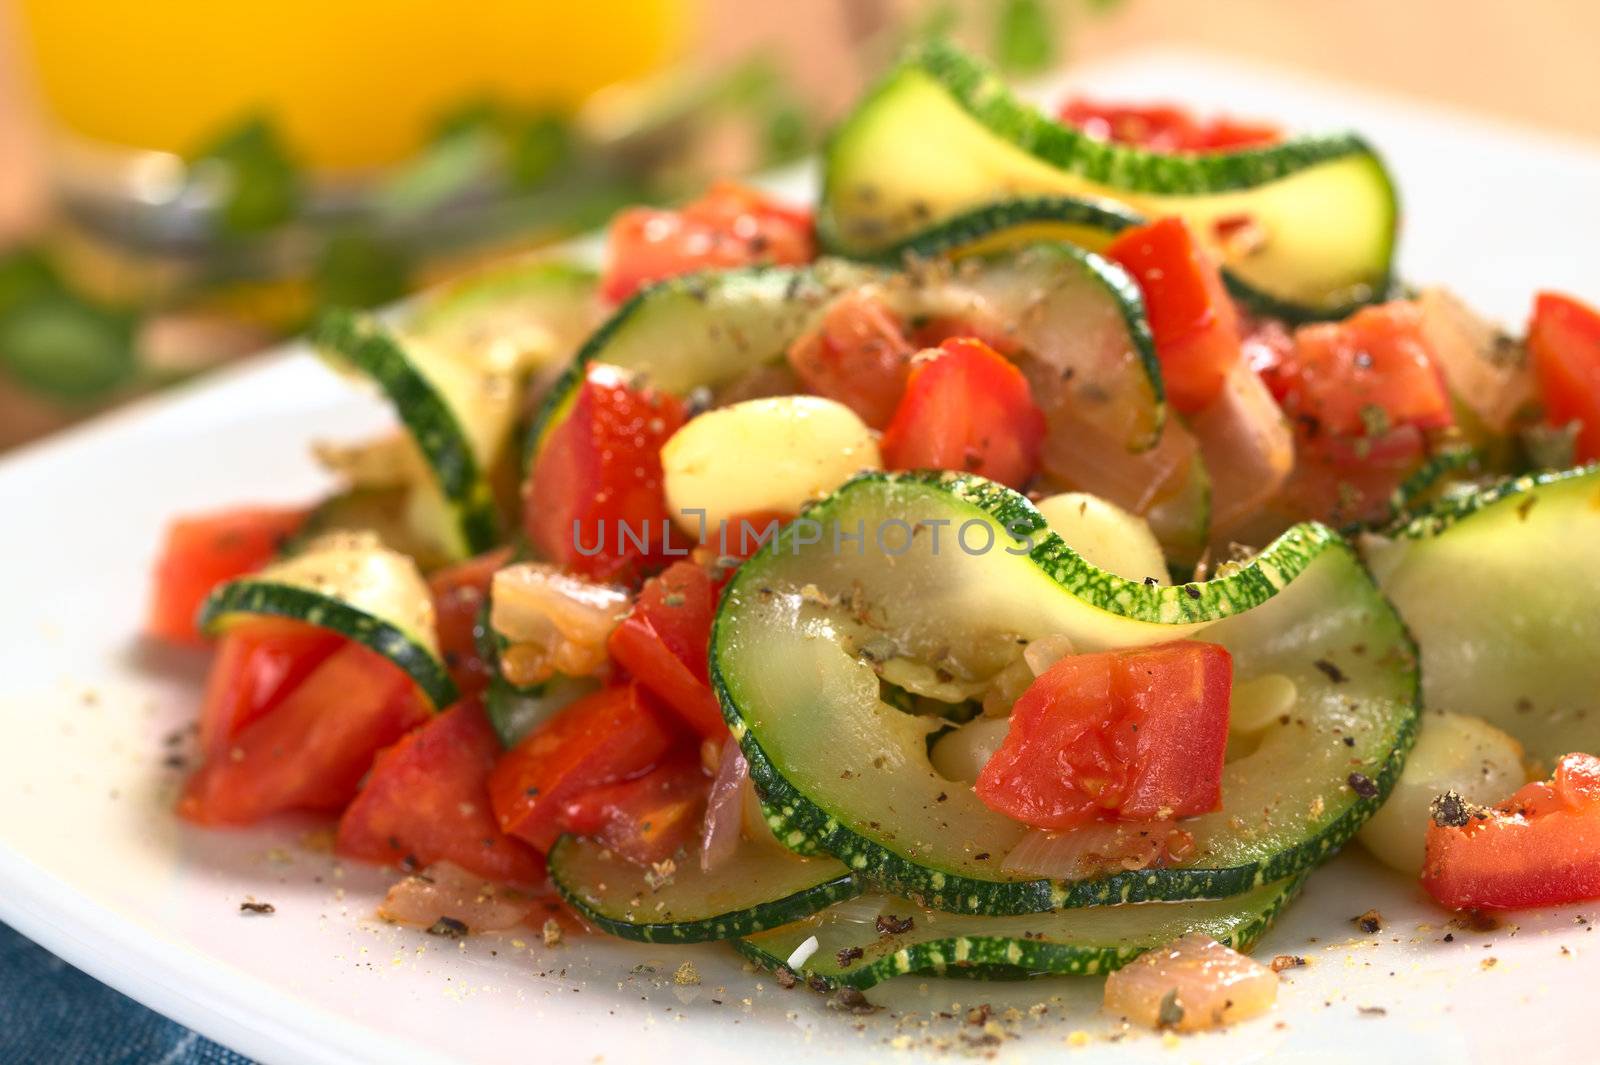 Sauteed zucchini slices, tomato cubes, onion and cooked corn grains with dried herbs and black pepper (Selective Focus, Focus on the front of the zucchini slice and tomato piece in the front)